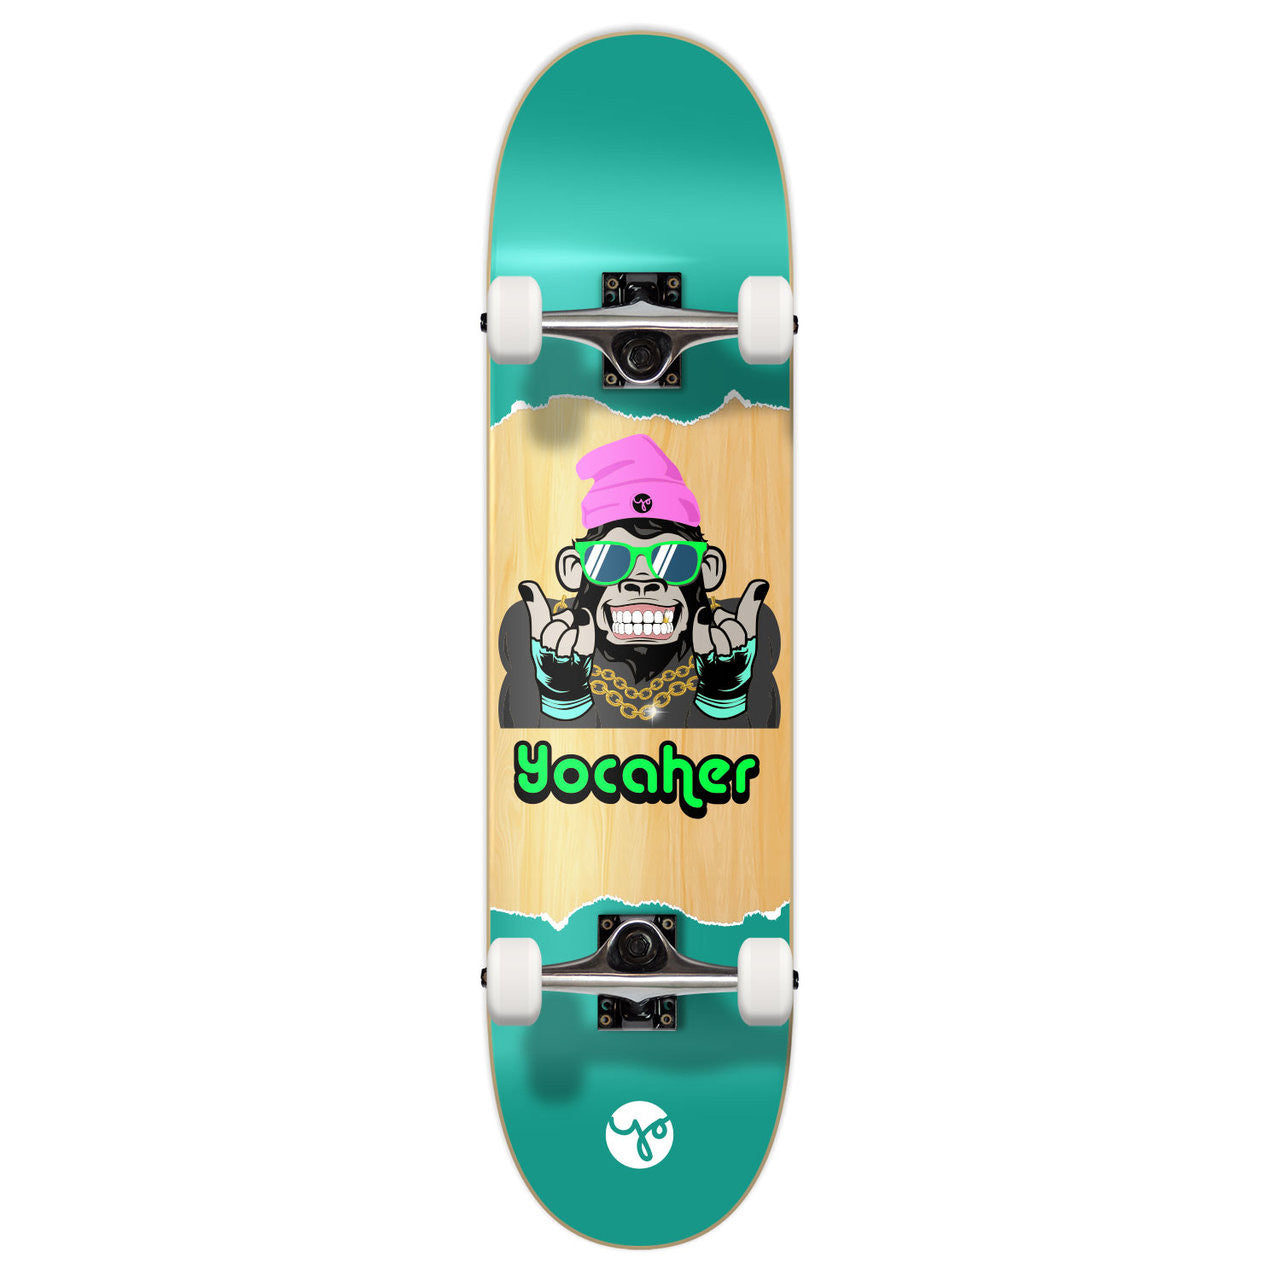 Yocaher Complete Skateboard 7.75" - Chimp Series - See No Evil